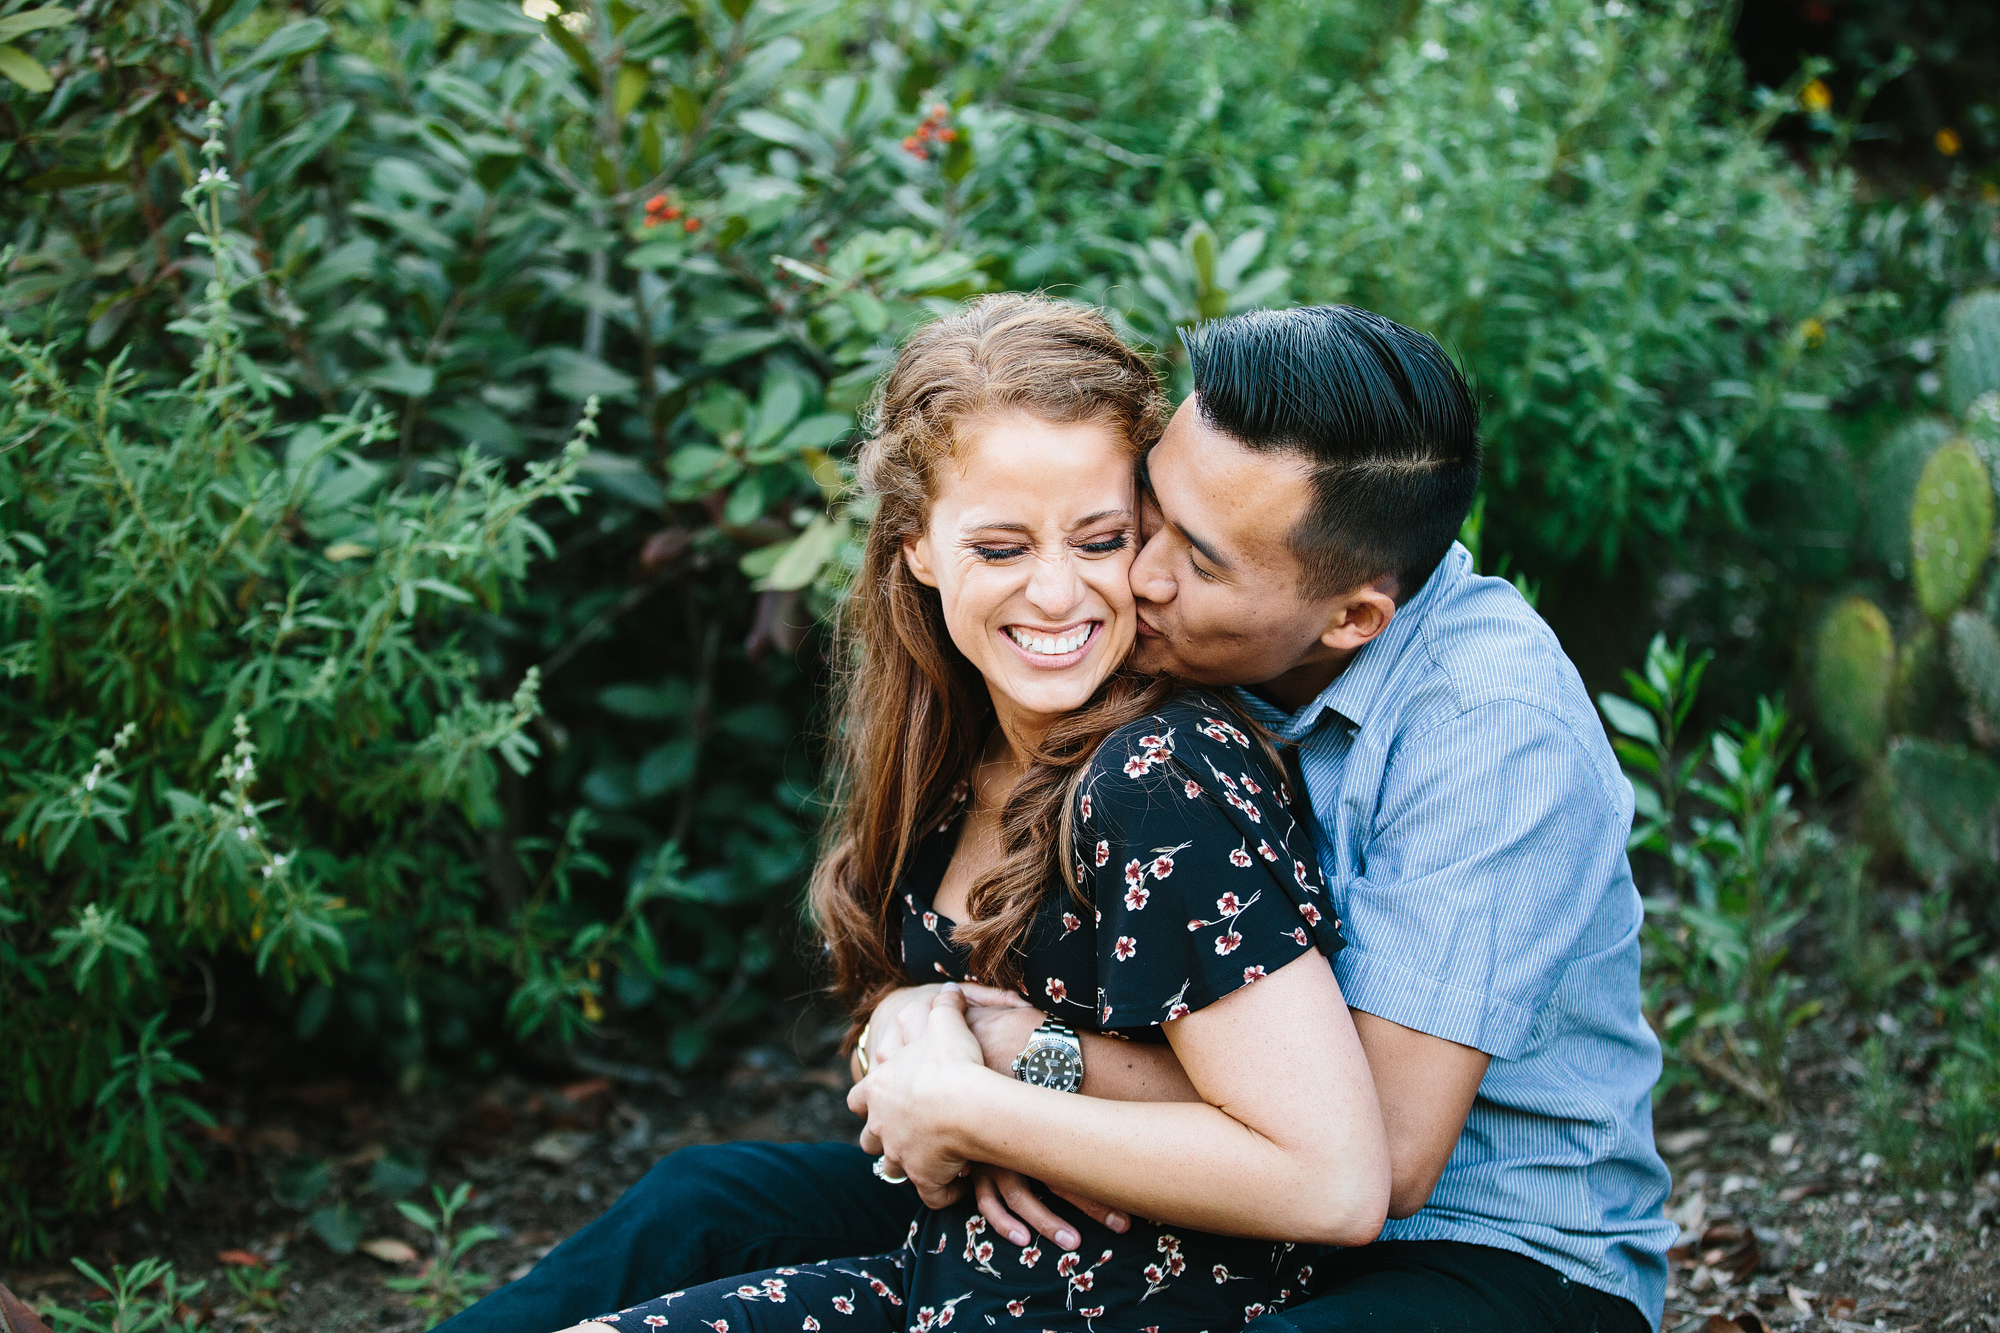 groom kissing bride to be's cheek from behind with greenery plants in background